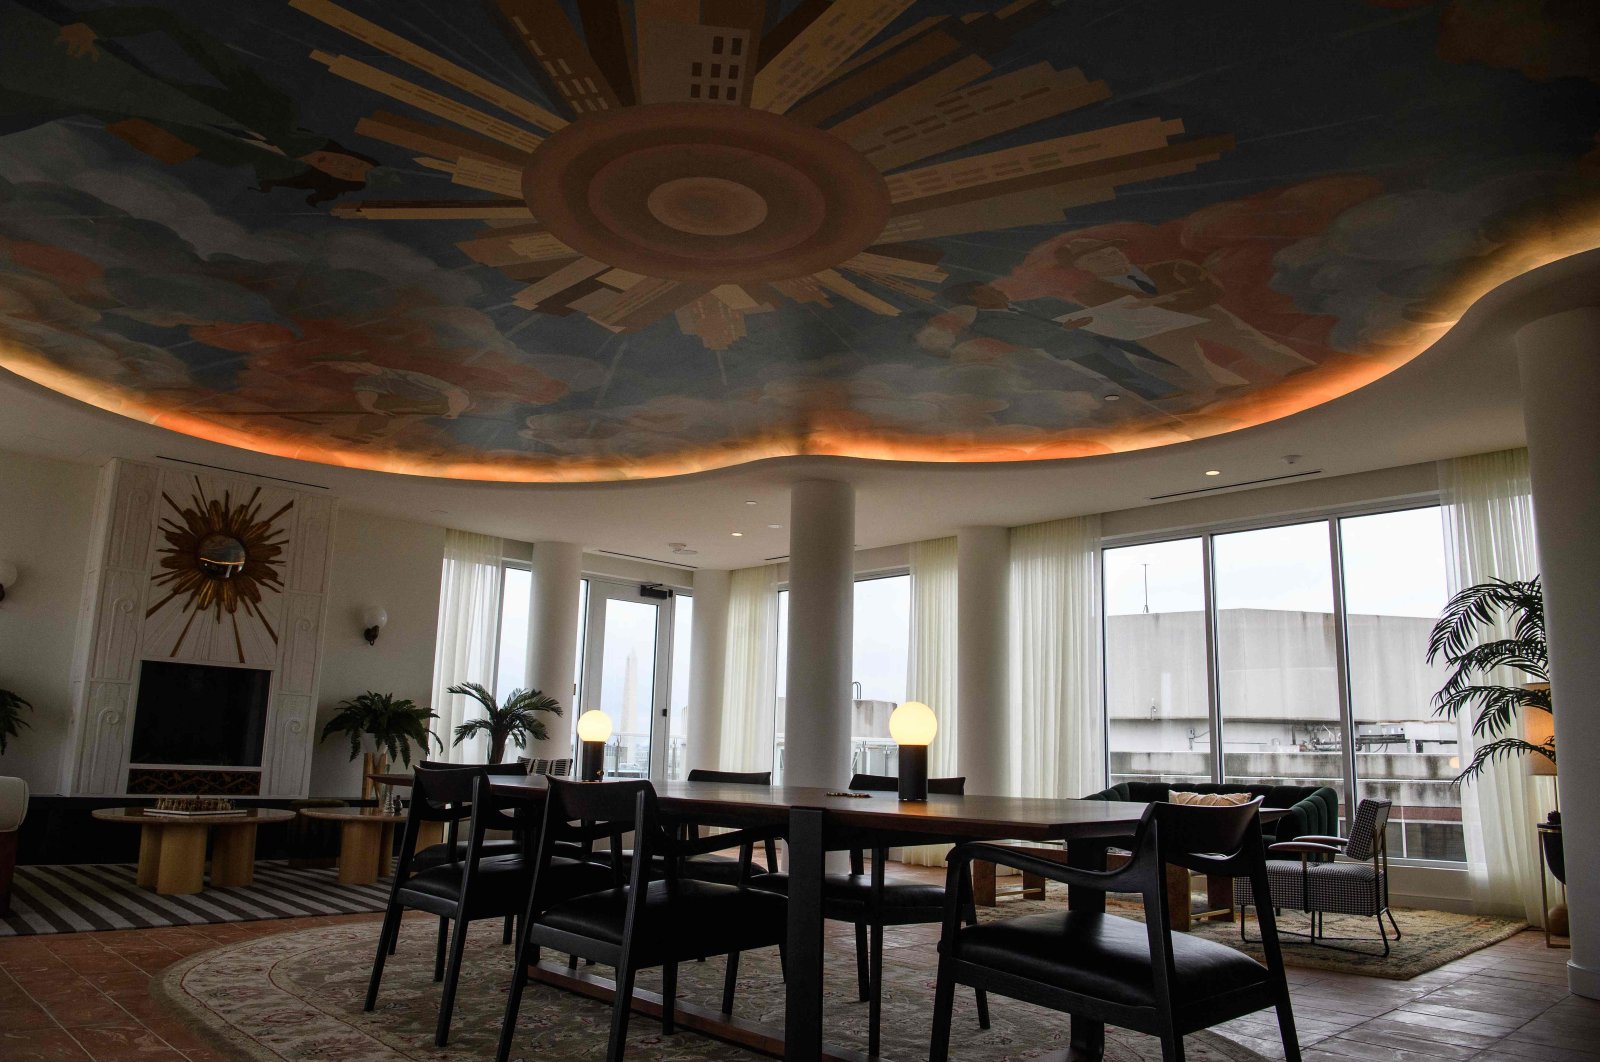 View of the lounge area at the Wray building in Washington, D.C., U.S., Jan. 20, 2022. (AFP Photo)